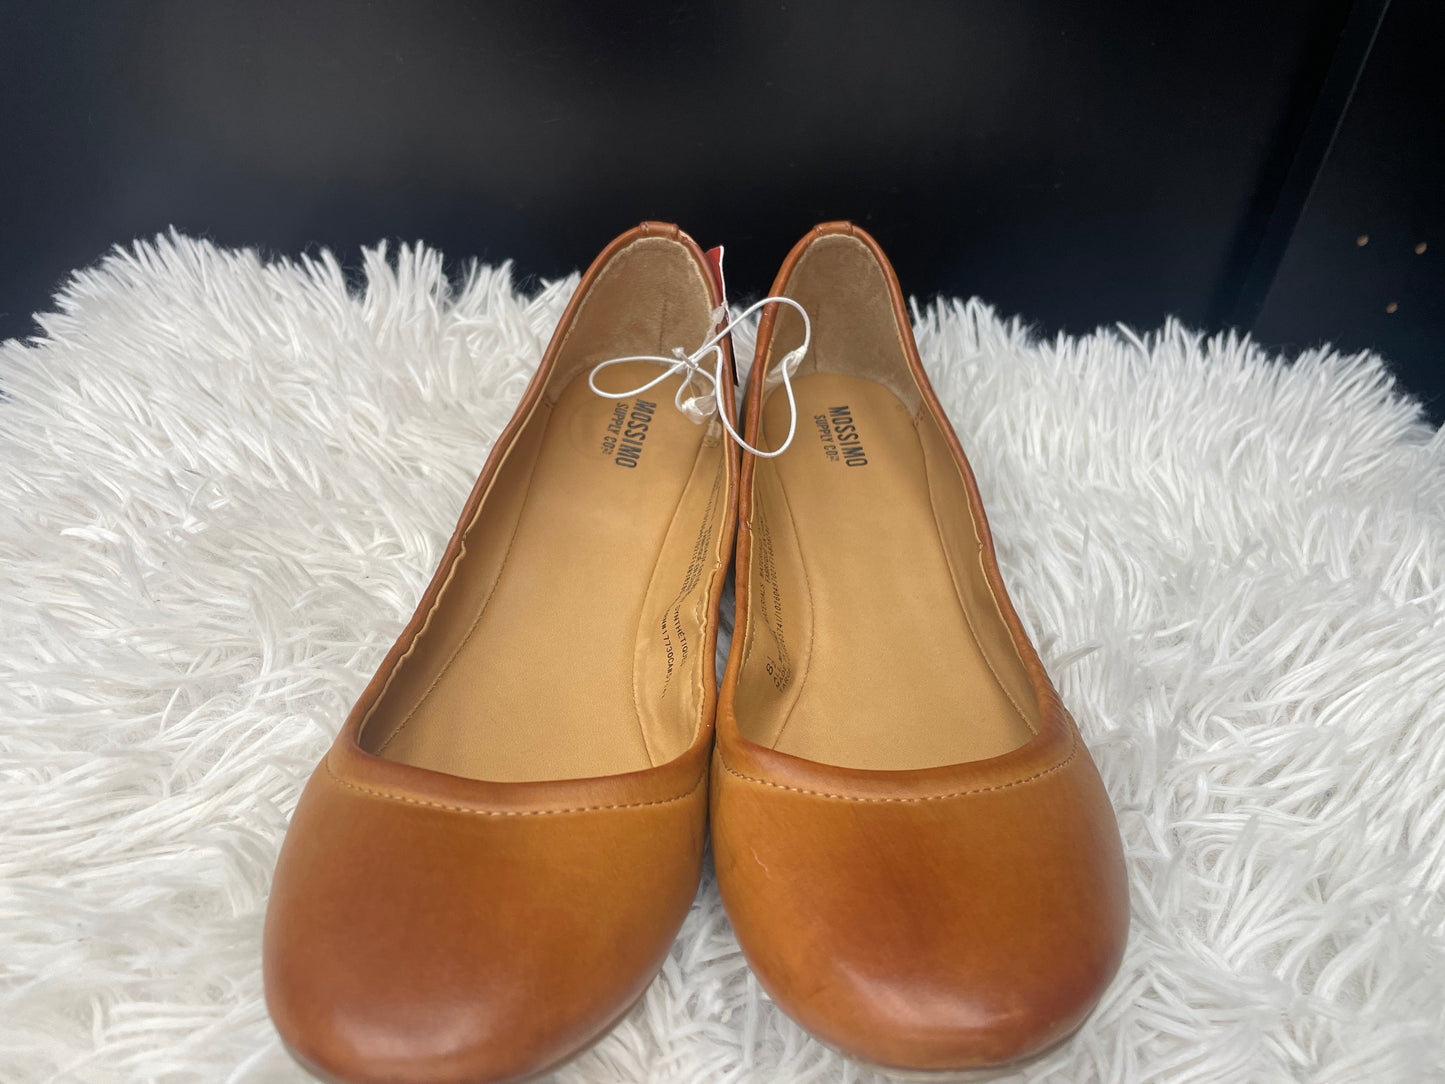 Brown Shoes Flats Ballet Mossimo, Size 8.5